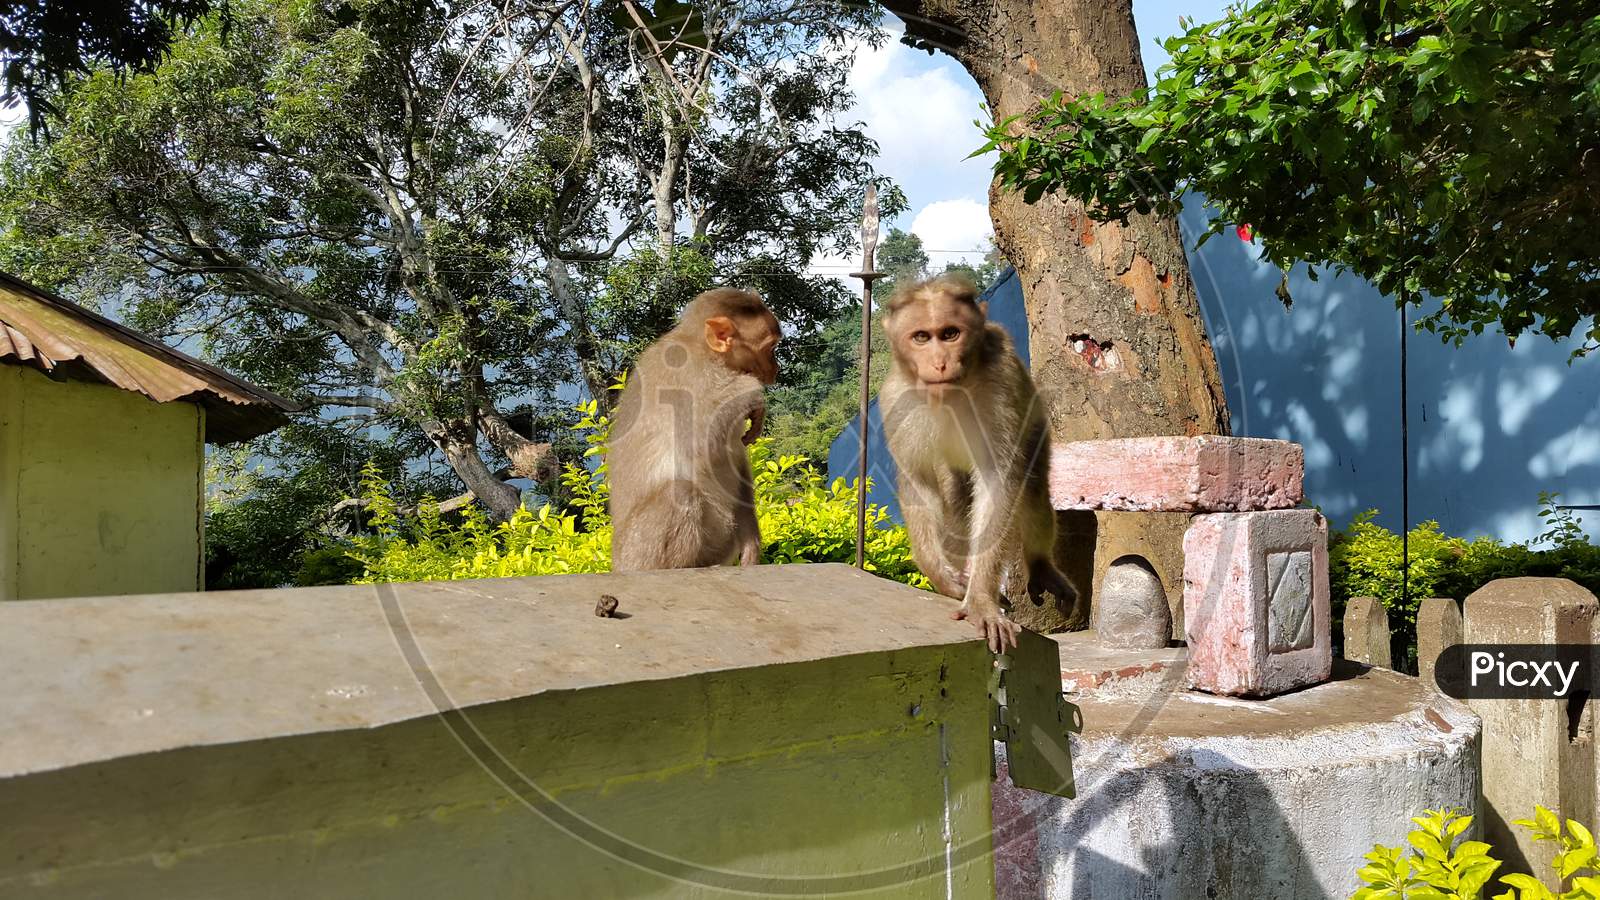 monkeys out on a bright sunny day